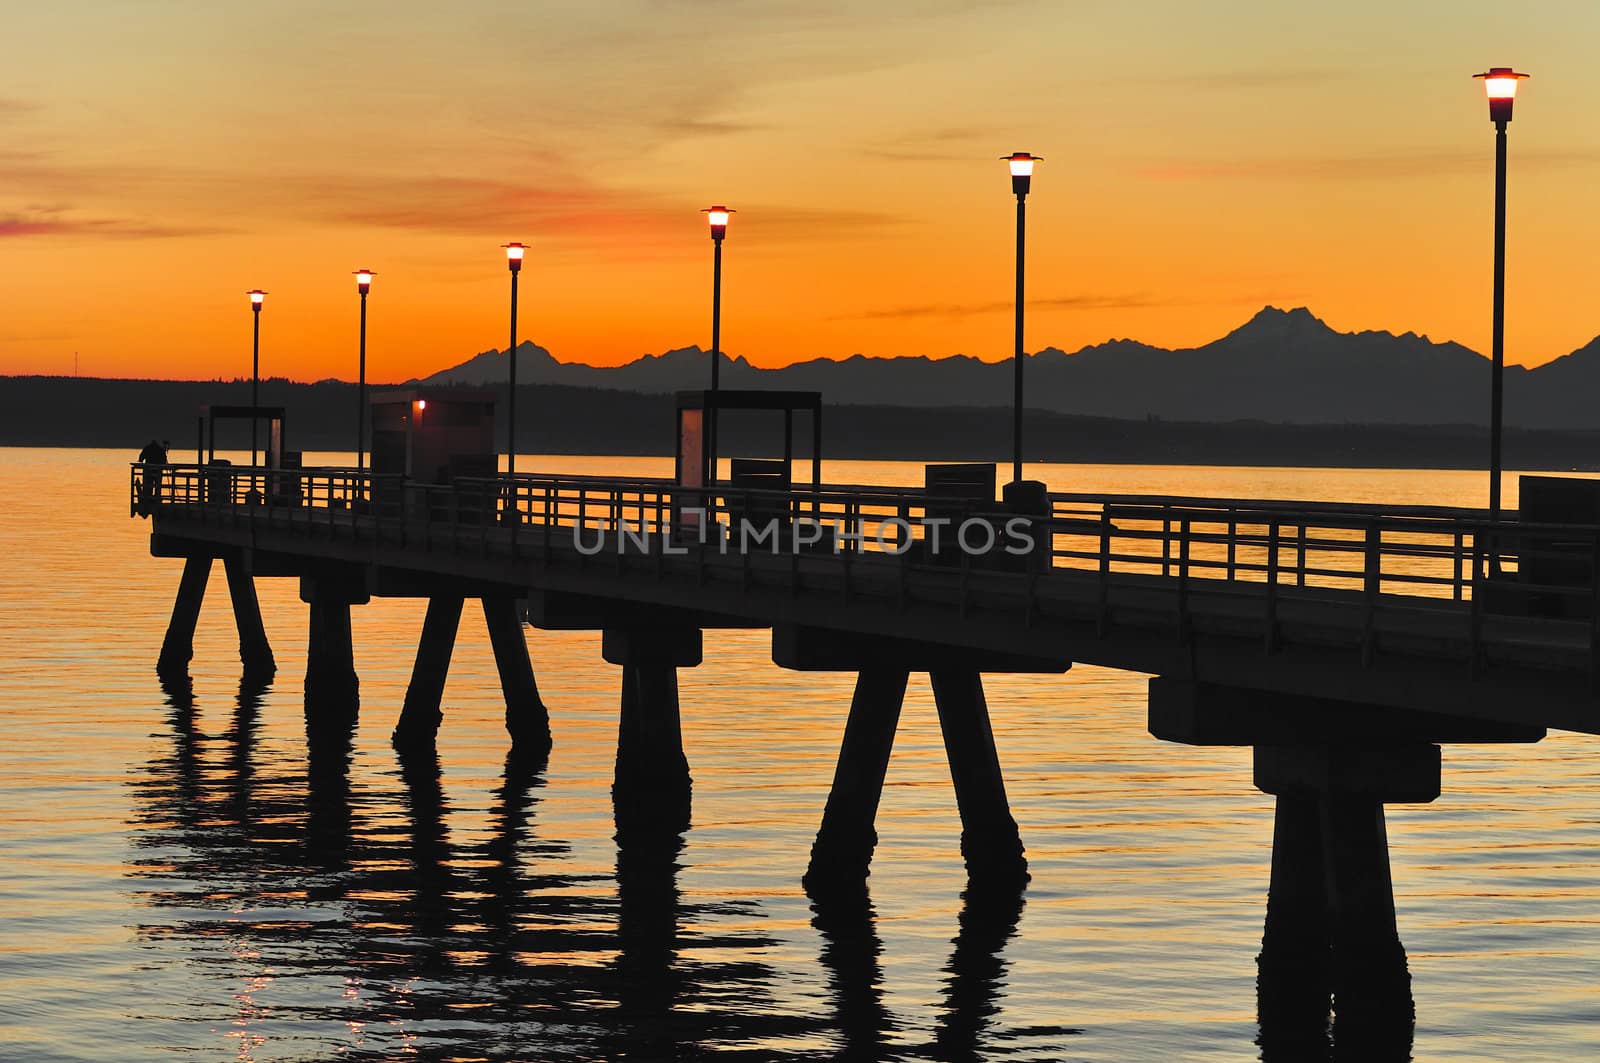 Marine pier at sunset, the Gulf of Puget Sound and the mountains of Olympic National Park, WA.